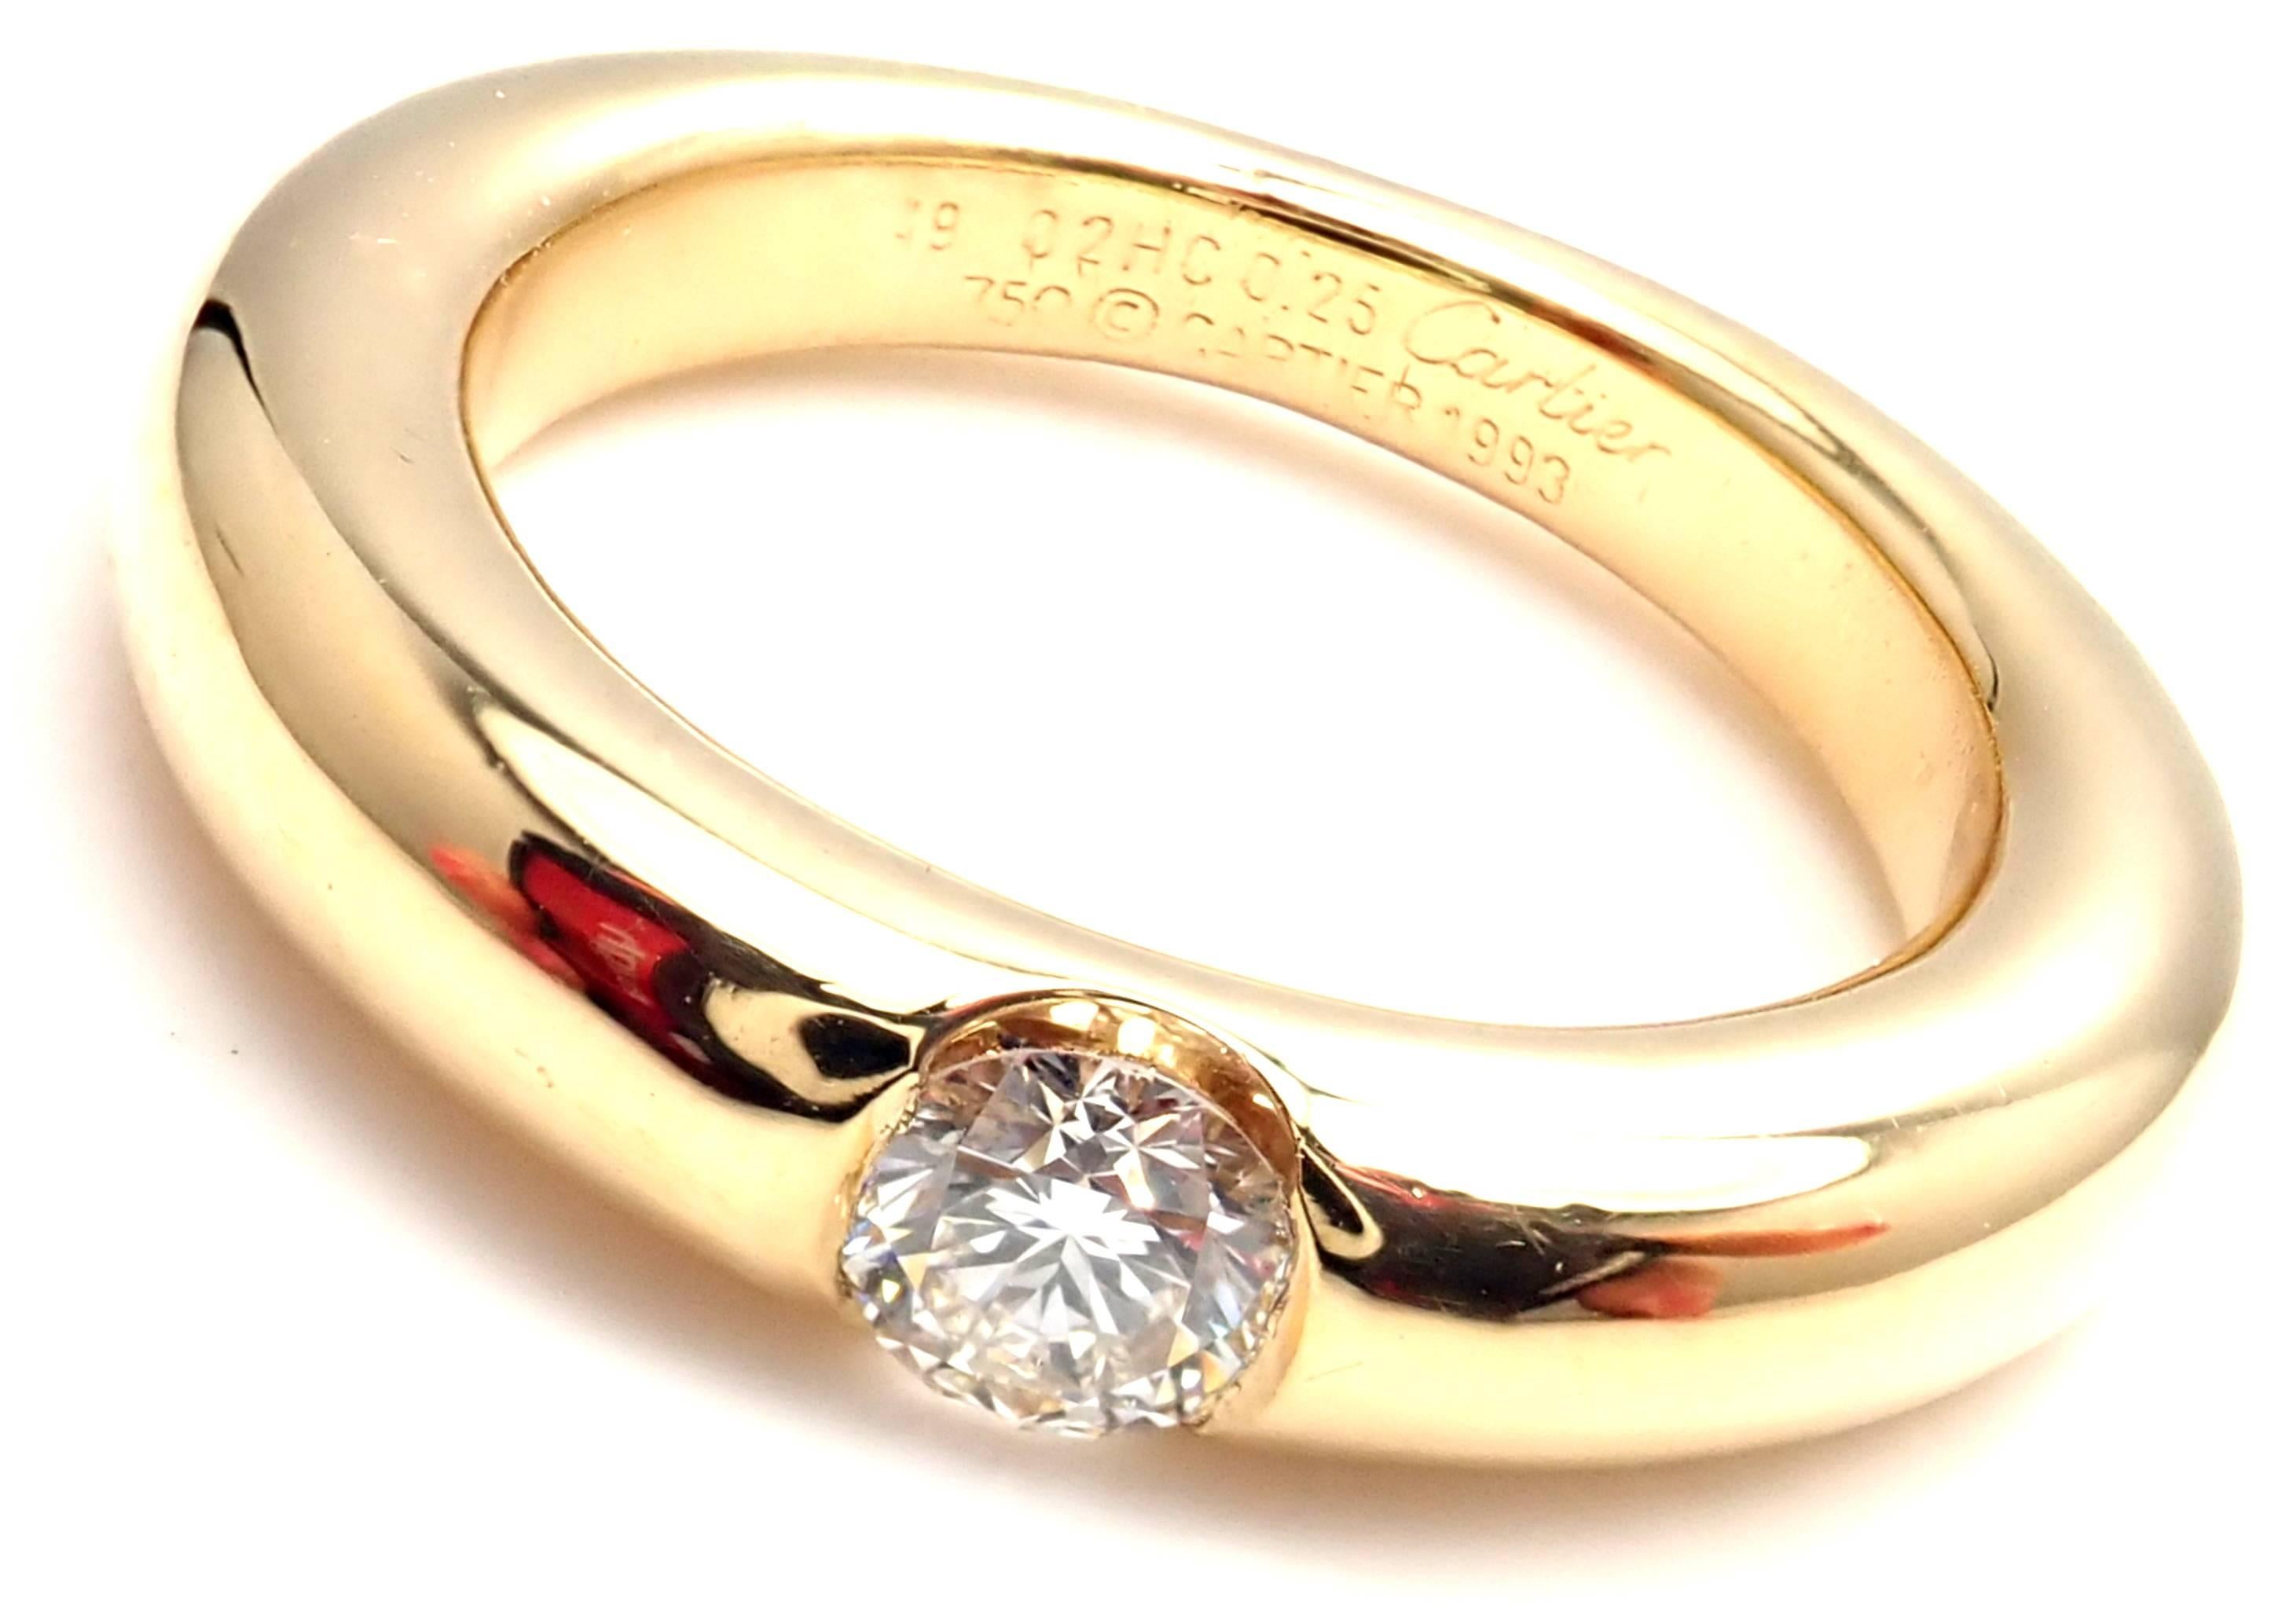 18k Yellow Gold Ellipse Diamond Band Ring by Cartier.
With 11 round brilliant cut diamond VS1 clarity, G color total weight approx..25ct
Details:
Width: 4mm
Weight: 8.6 grams
Ring Size: European 49,  US 4 3/4
Stamped Hallmarks: Cartier 750 49 O2HC